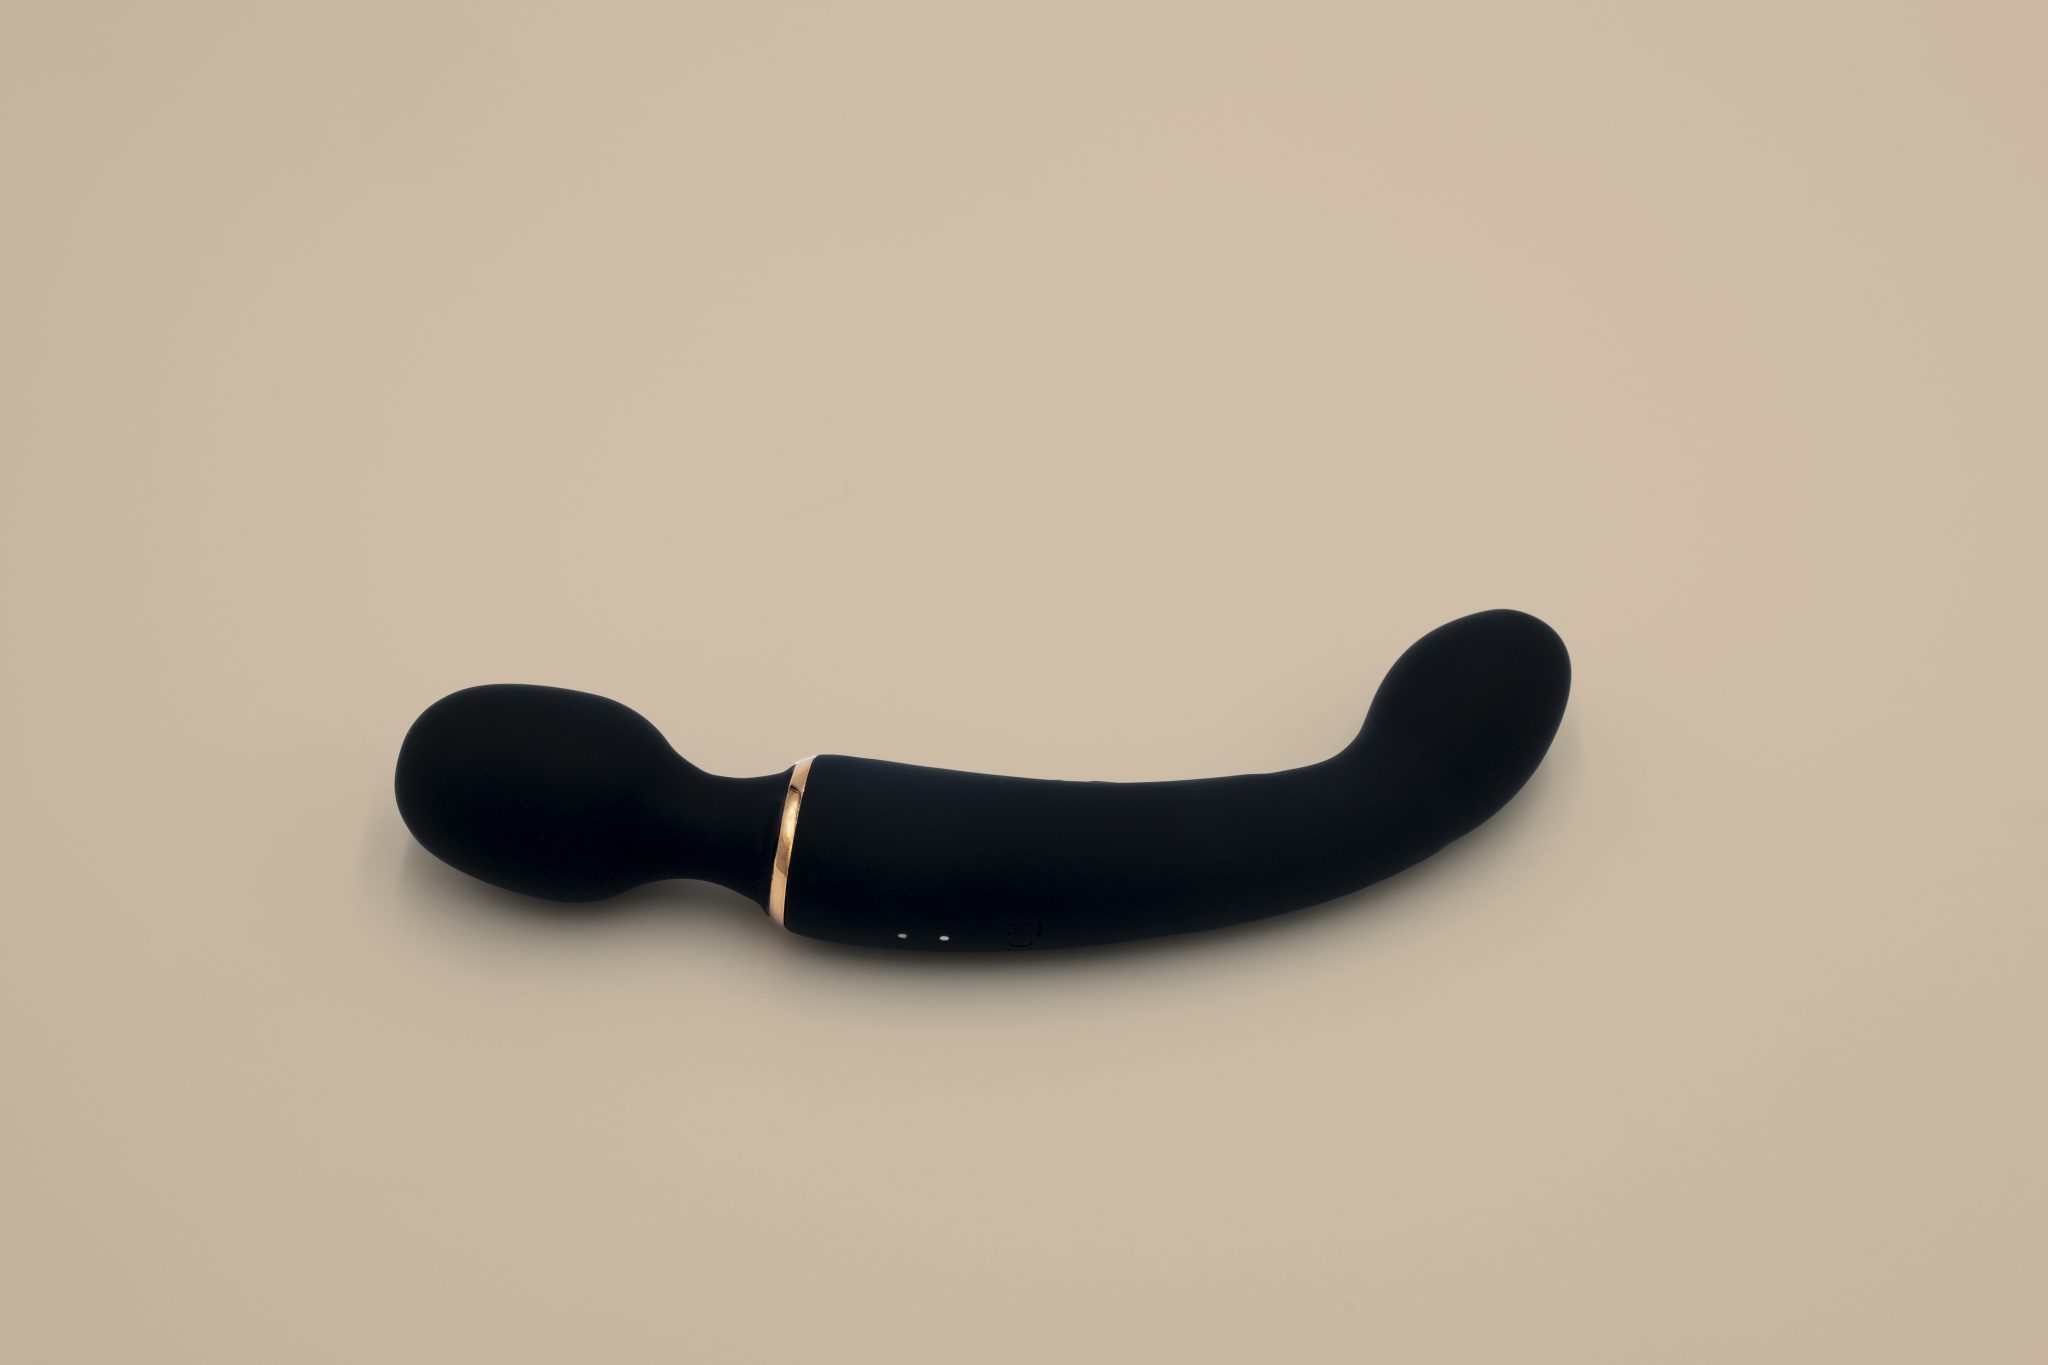 Ongemak zoon Buitenlander Microfoon vibrator/massager double ended - Sensual Minded